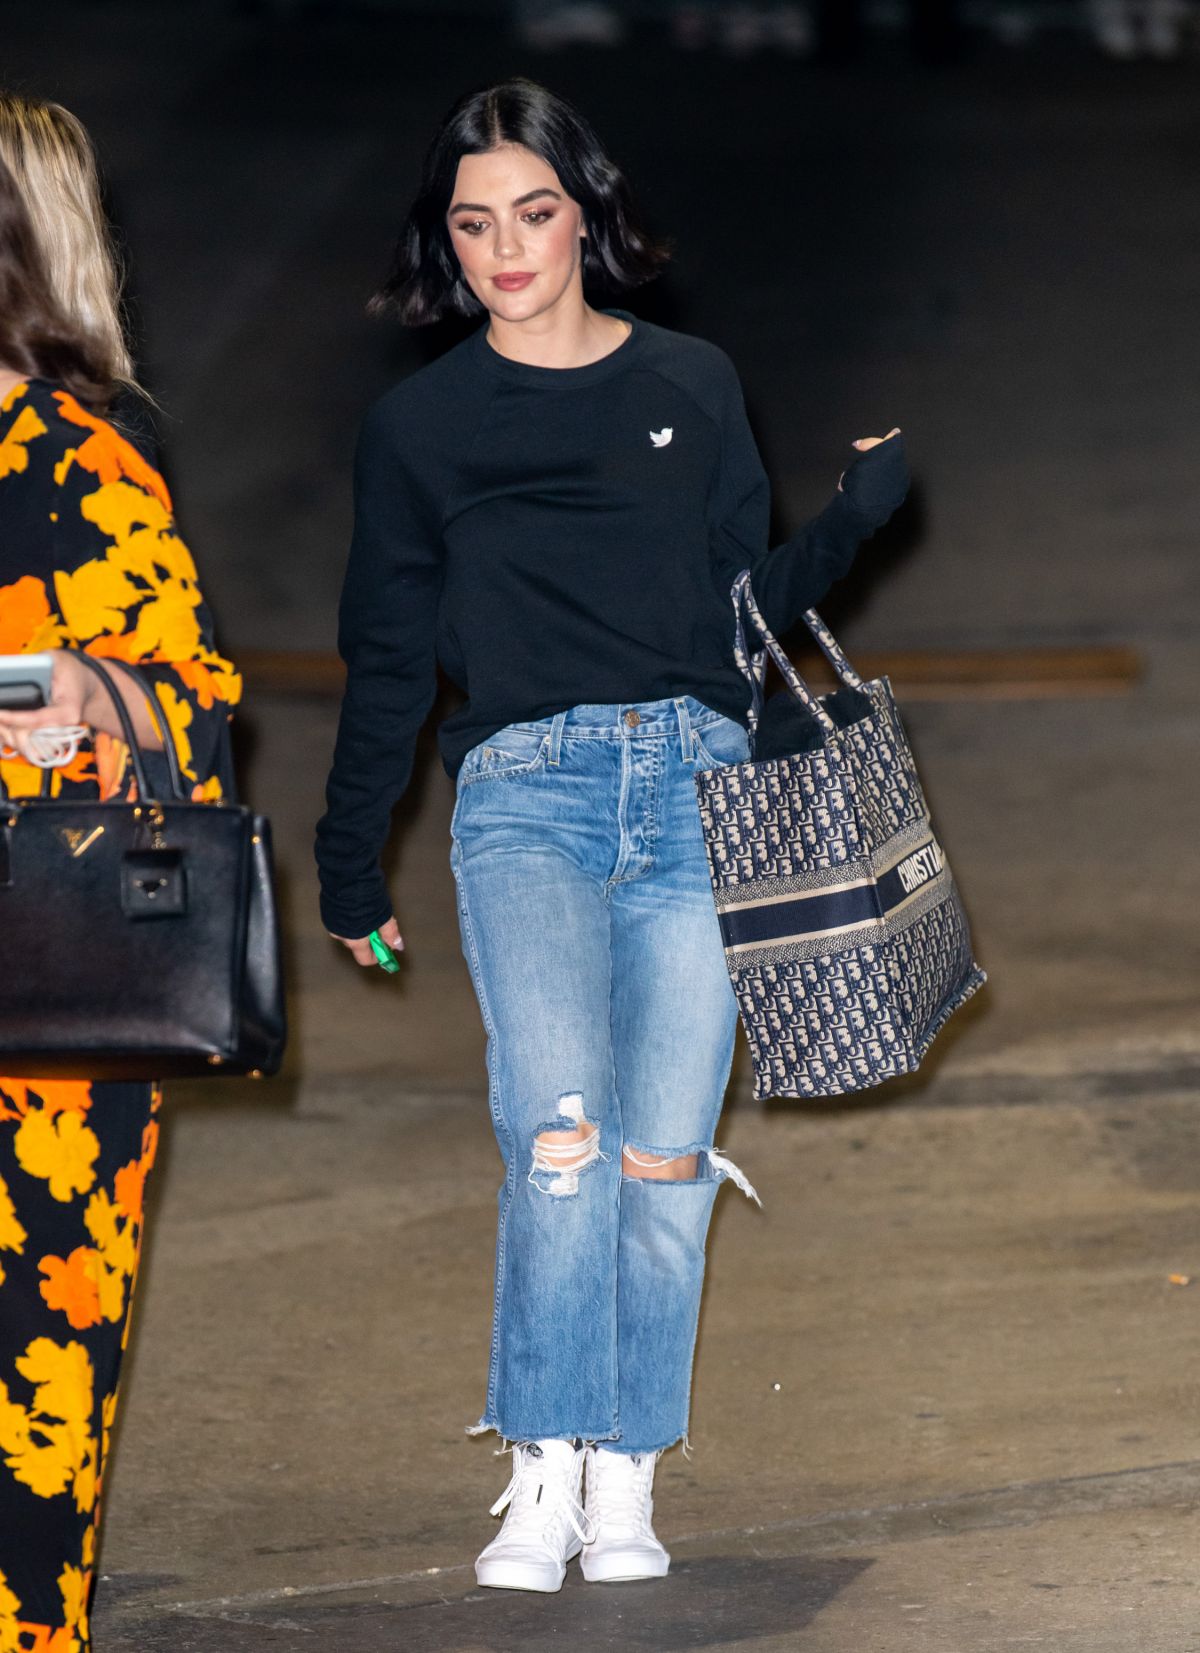 LUCY HALE in Ripped Jeans Arrives at Jimmy Kimmel Live in Los Angeles ...